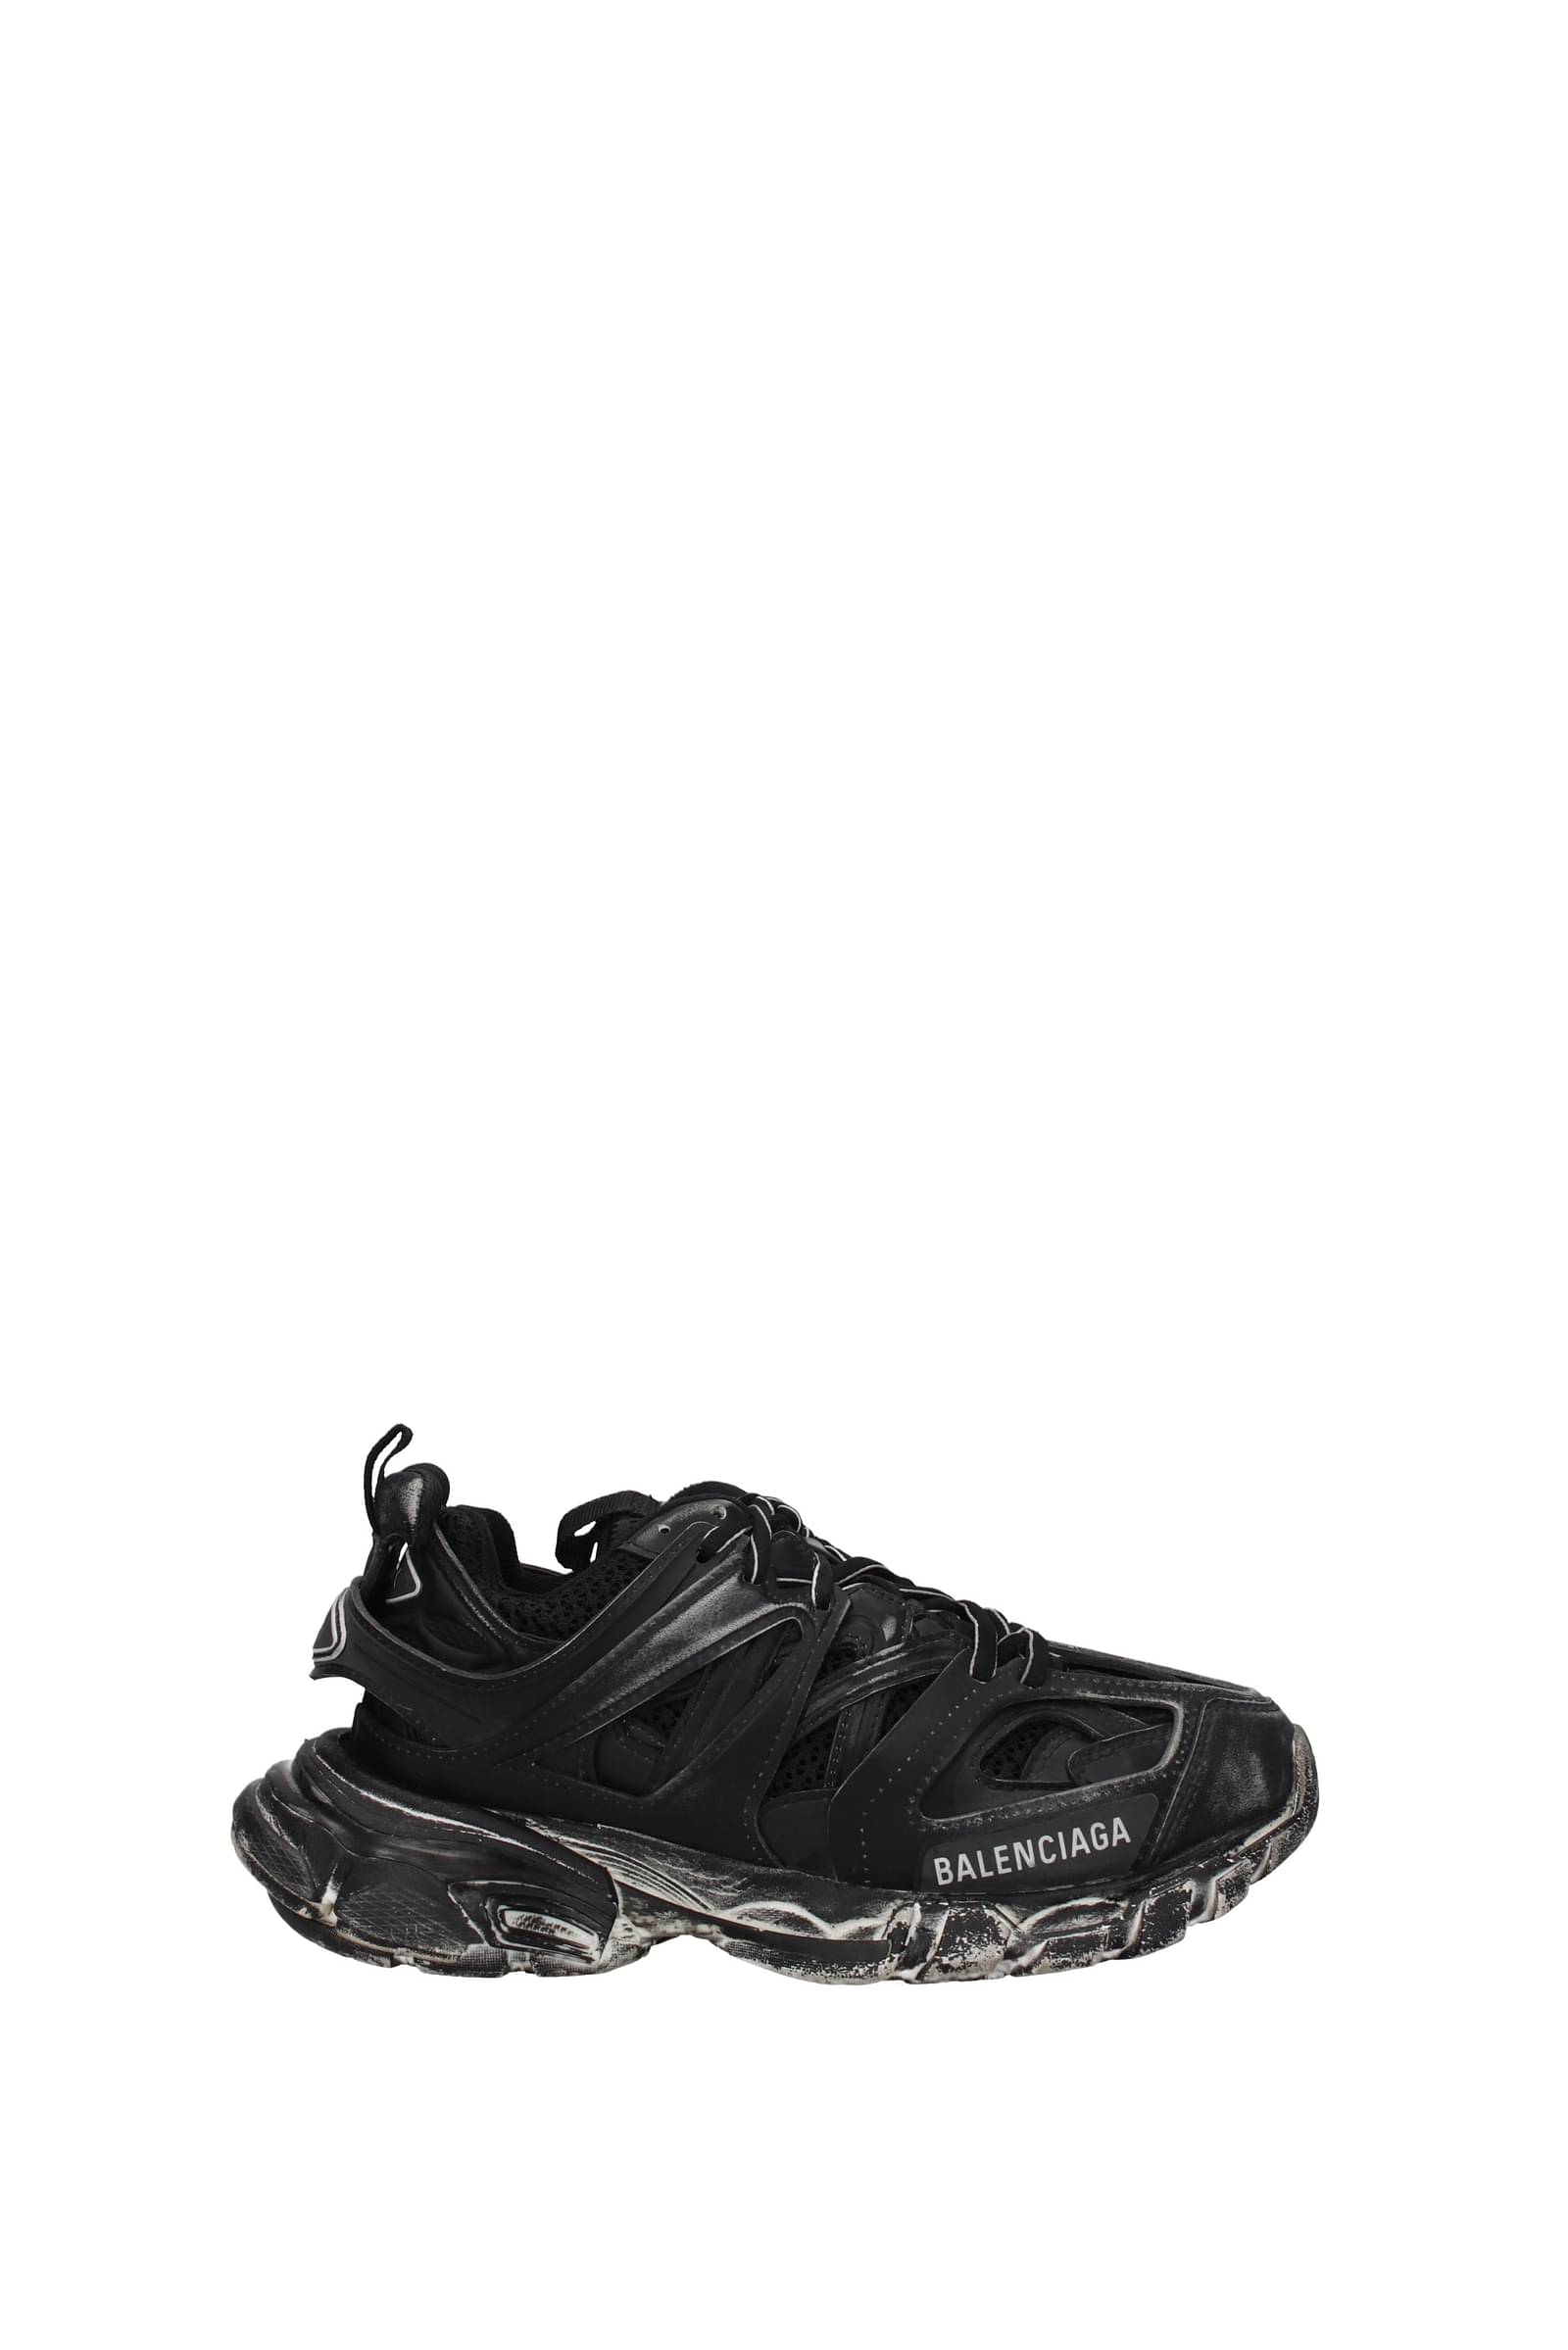 Balenciaga Triple S Faux-Leather Sneakers - Pink for Women